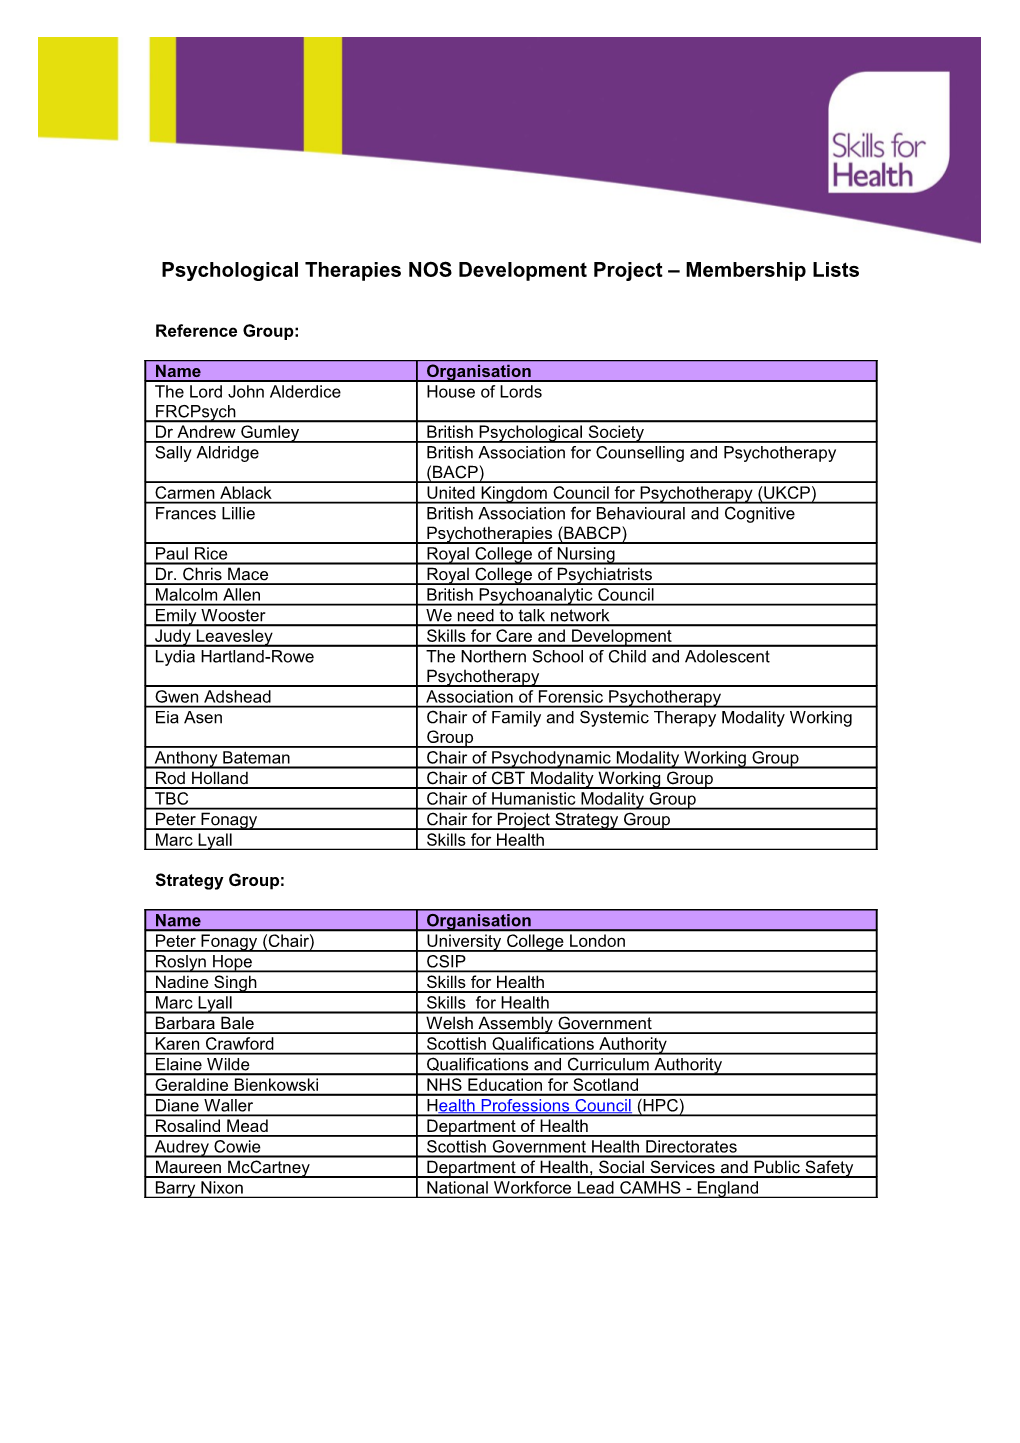 Psychological Therapies NOS Development Project Membership Lists